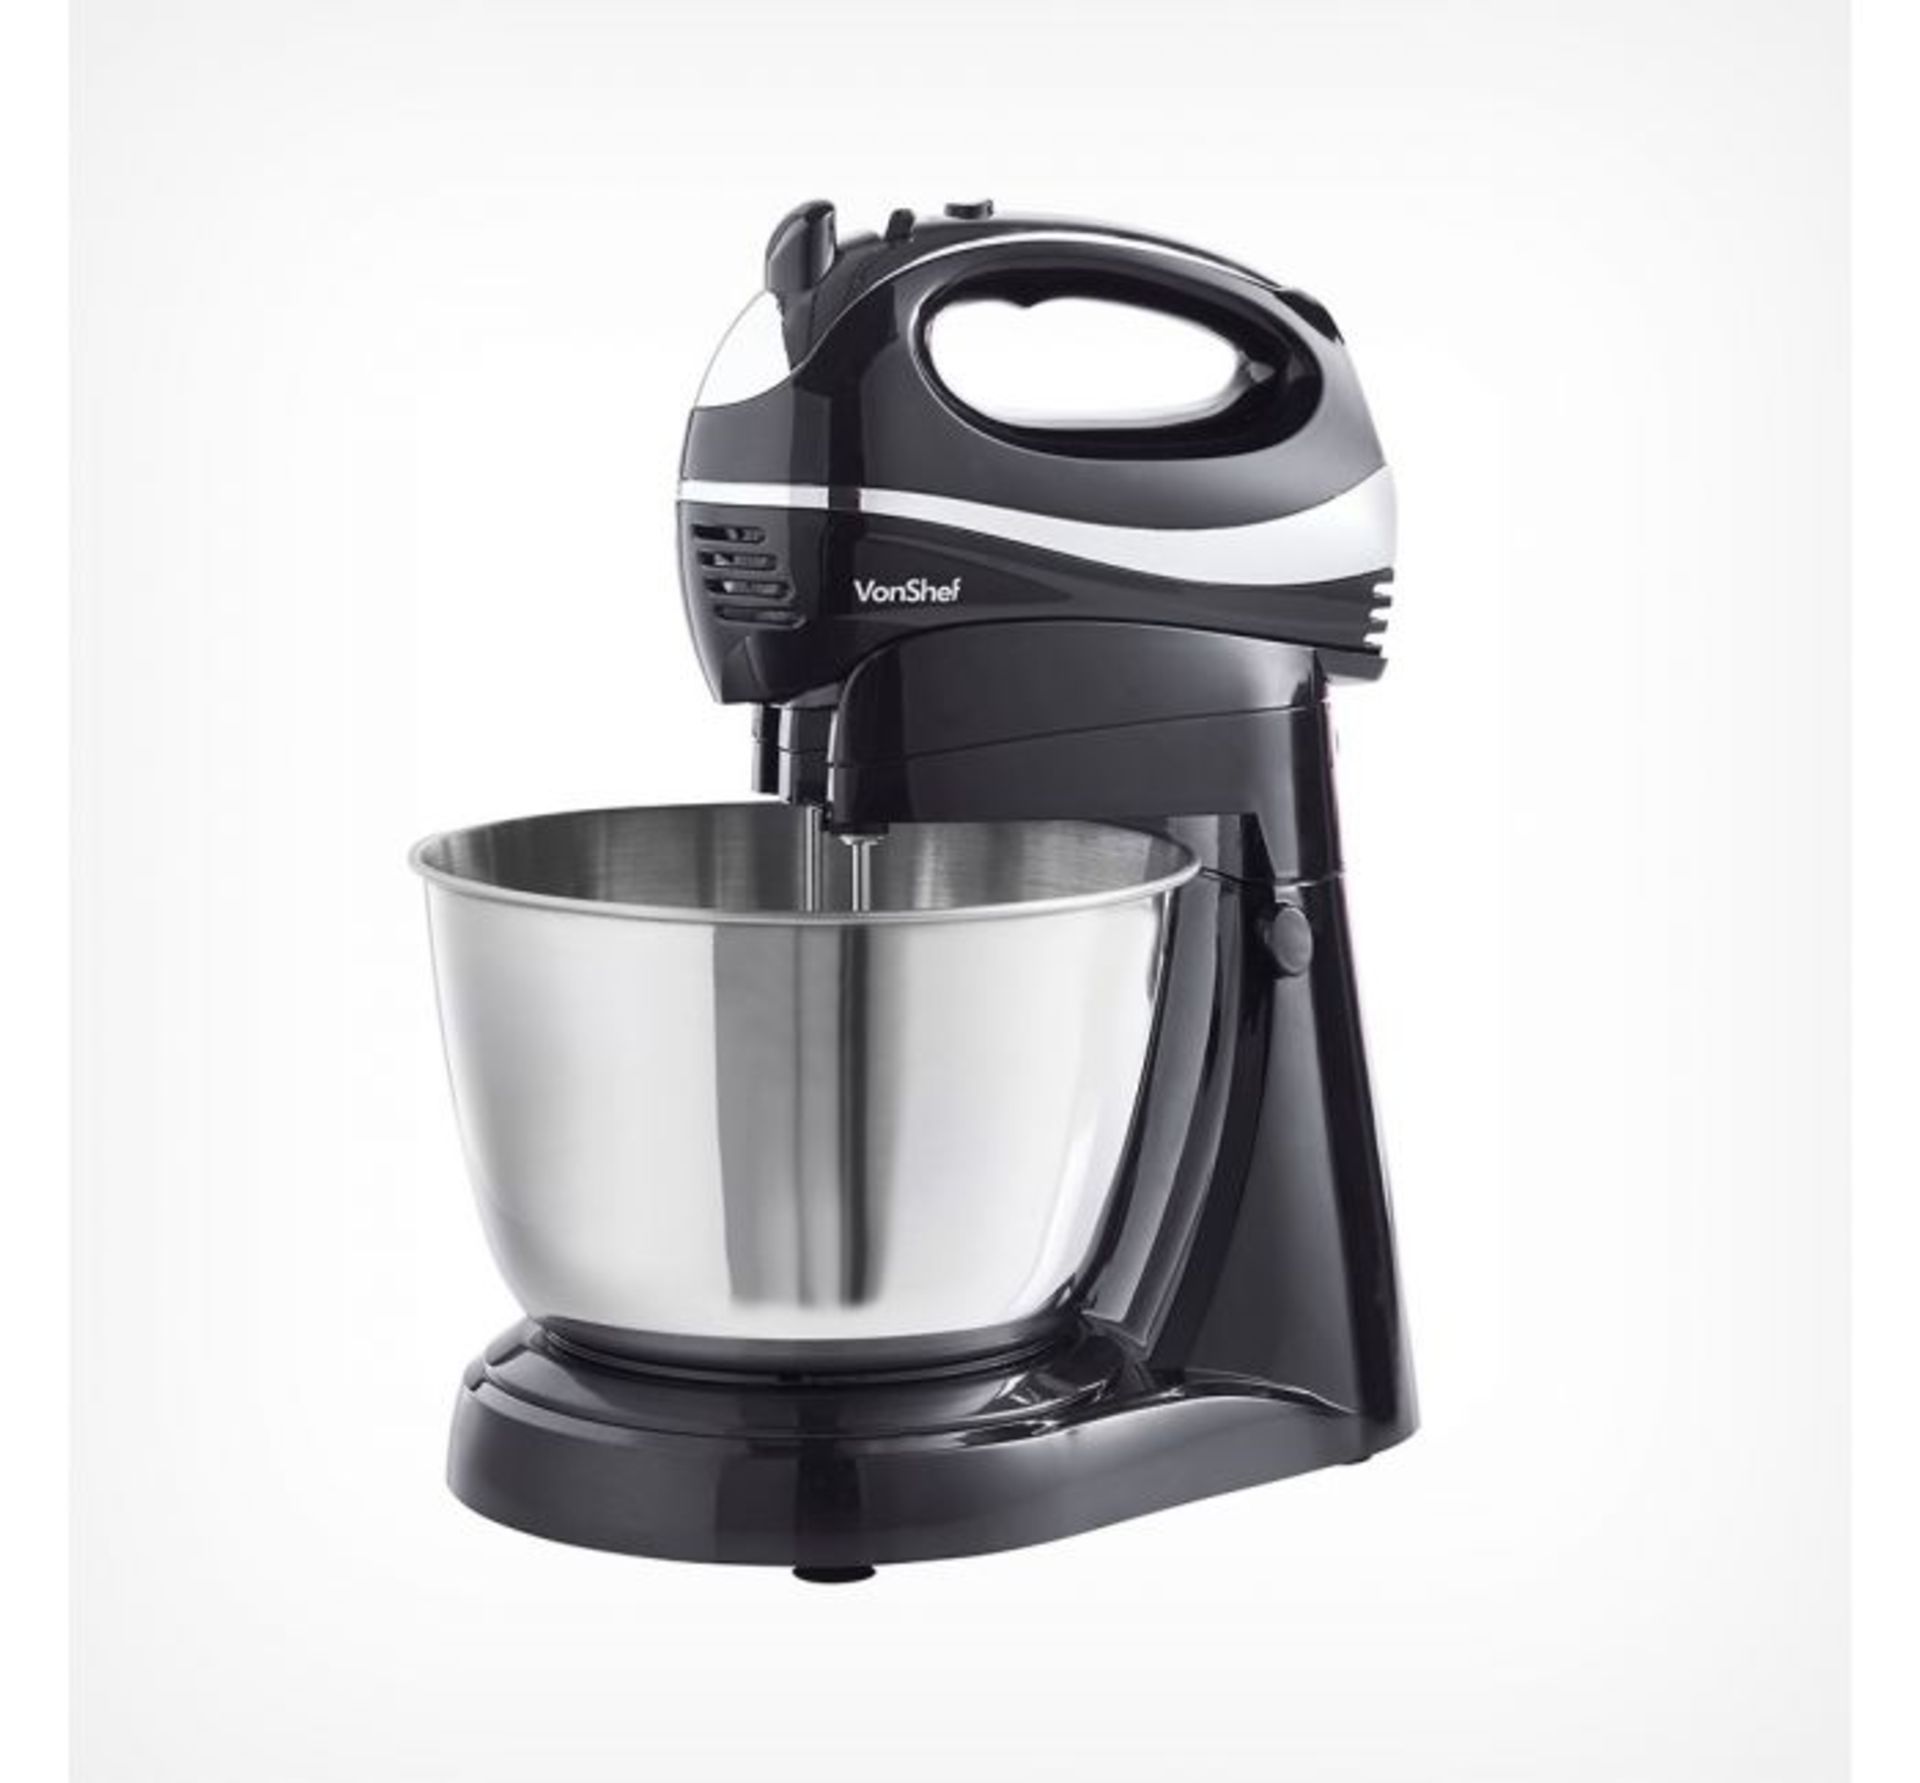 (MY10) Black Hand & Stand Mixer 2 in 1 stand mixer and hand mixer - compact, versatile and fun... - Image 2 of 2